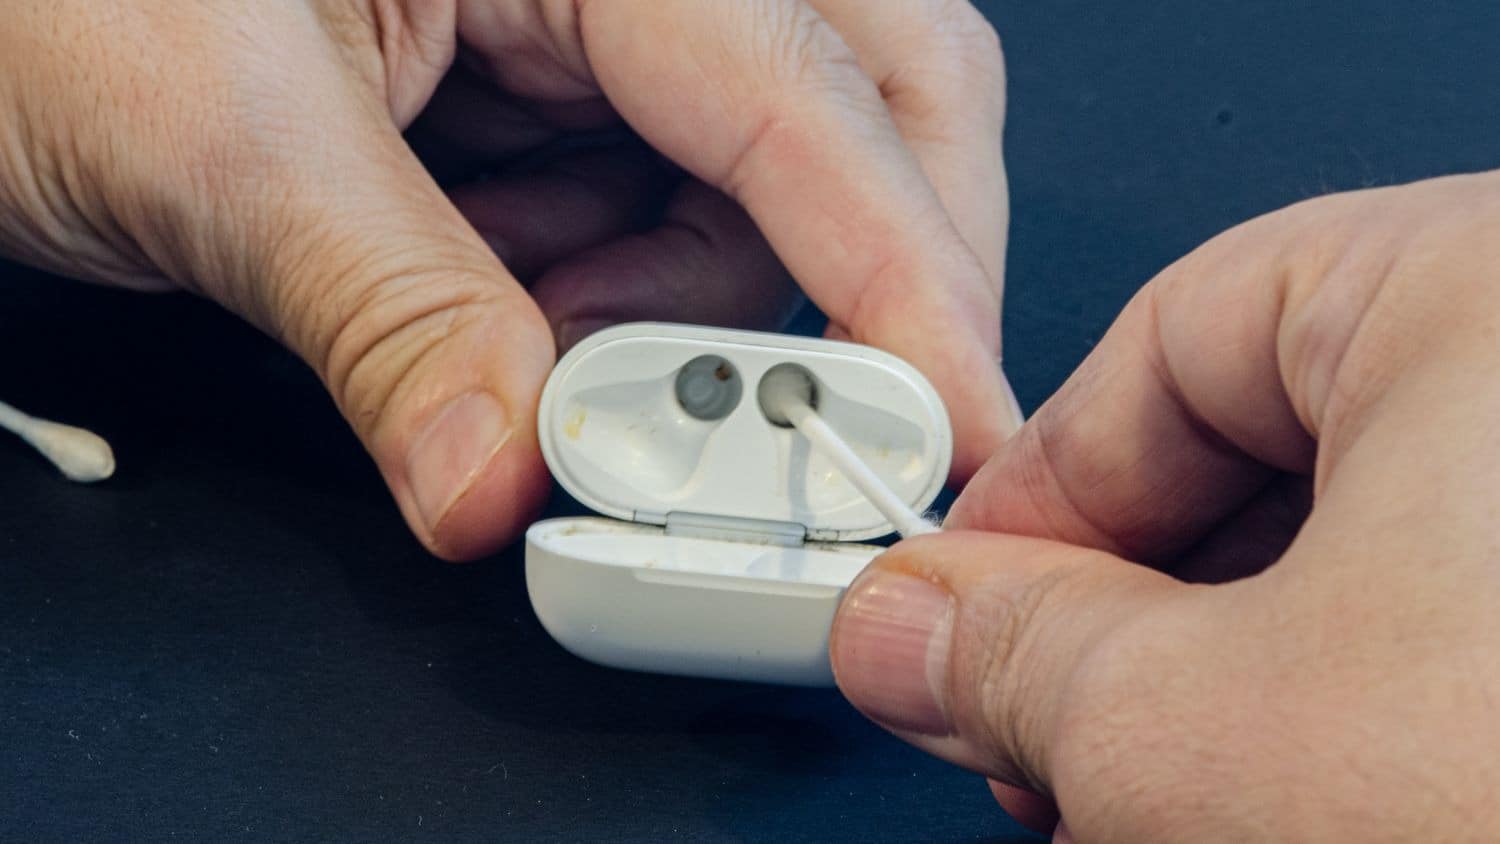 How to clean the charging case of AirPods Pro